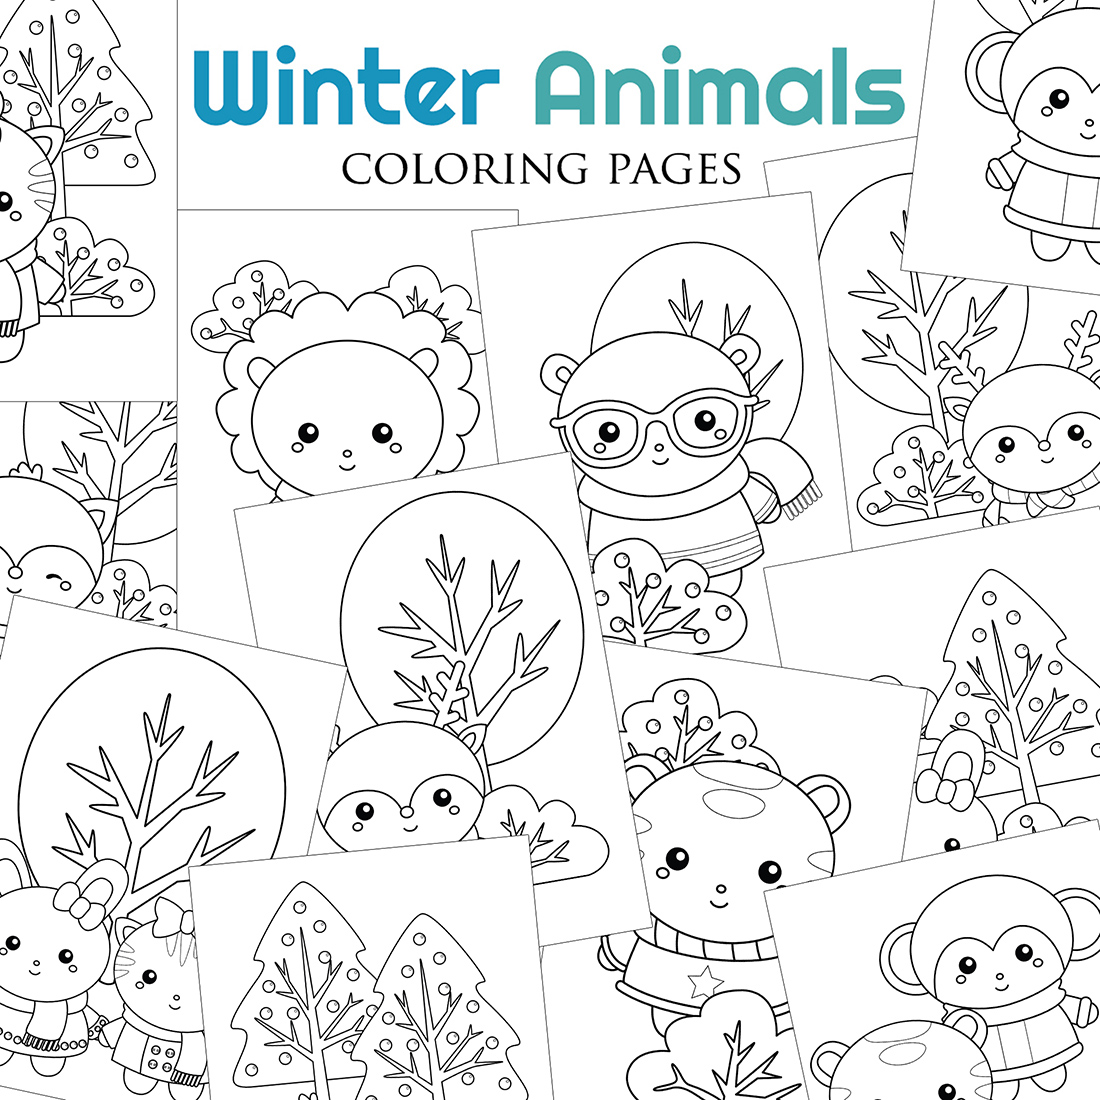 Cute and Funny Winter Animal Holiday Season Christmas Nature Monkey Rabbit Raindeer Tiger Cat Squirrel Fox Bear Cartoon Coloring Activity for Kids and Adult cover image.